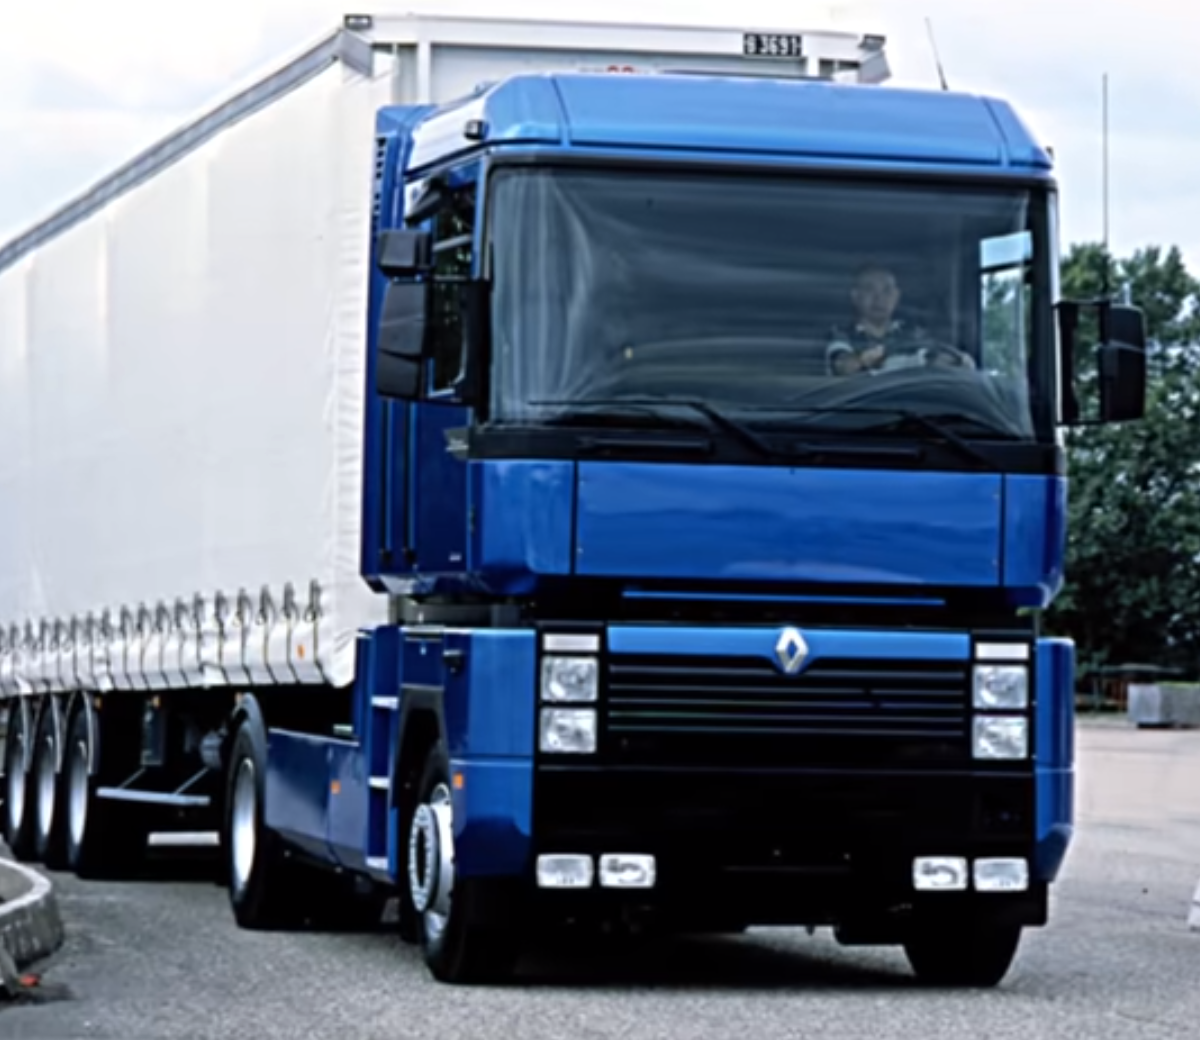 Renault Magnum is the most popular long-haul truck in Europe